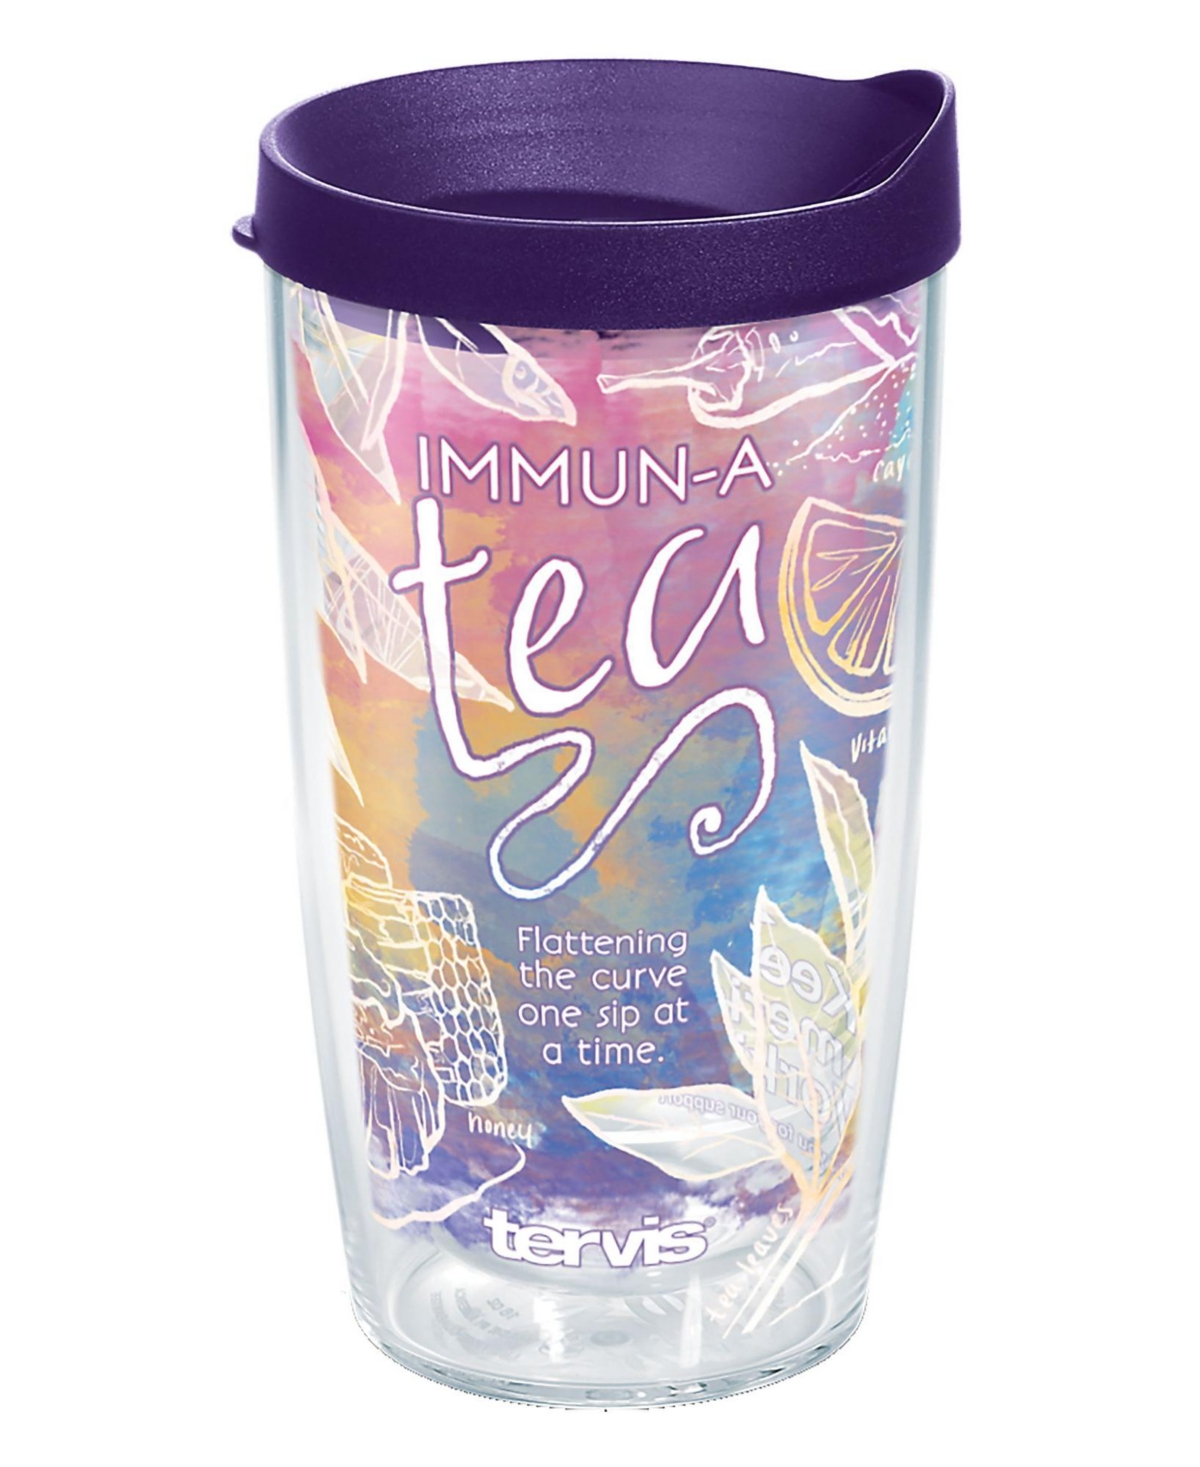 Tervis Tumbler Tervis Immuna Tea Made In Usa Double Walled Insulated Tumbler Travel Cup Keeps Drinks Cold & Hot, 16 In Open Miscellaneous